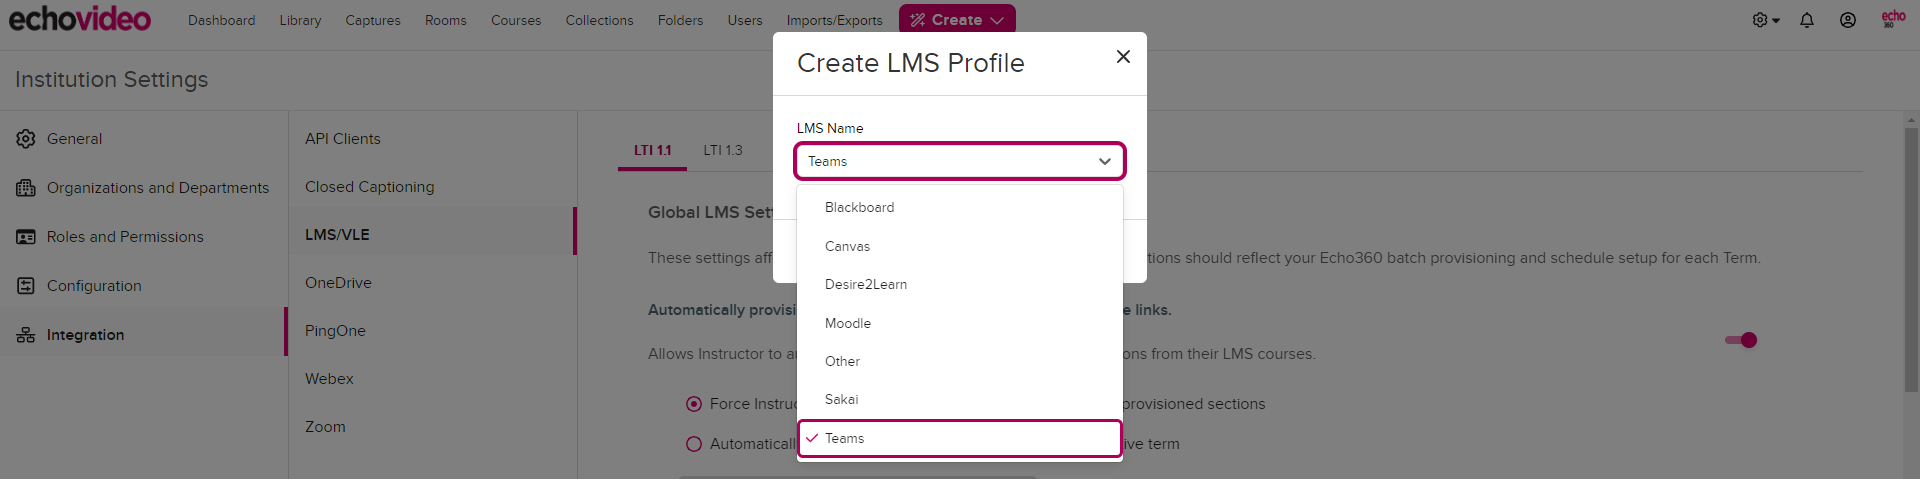 Create LMS profile modal with drop-down open and Teams option shown as described